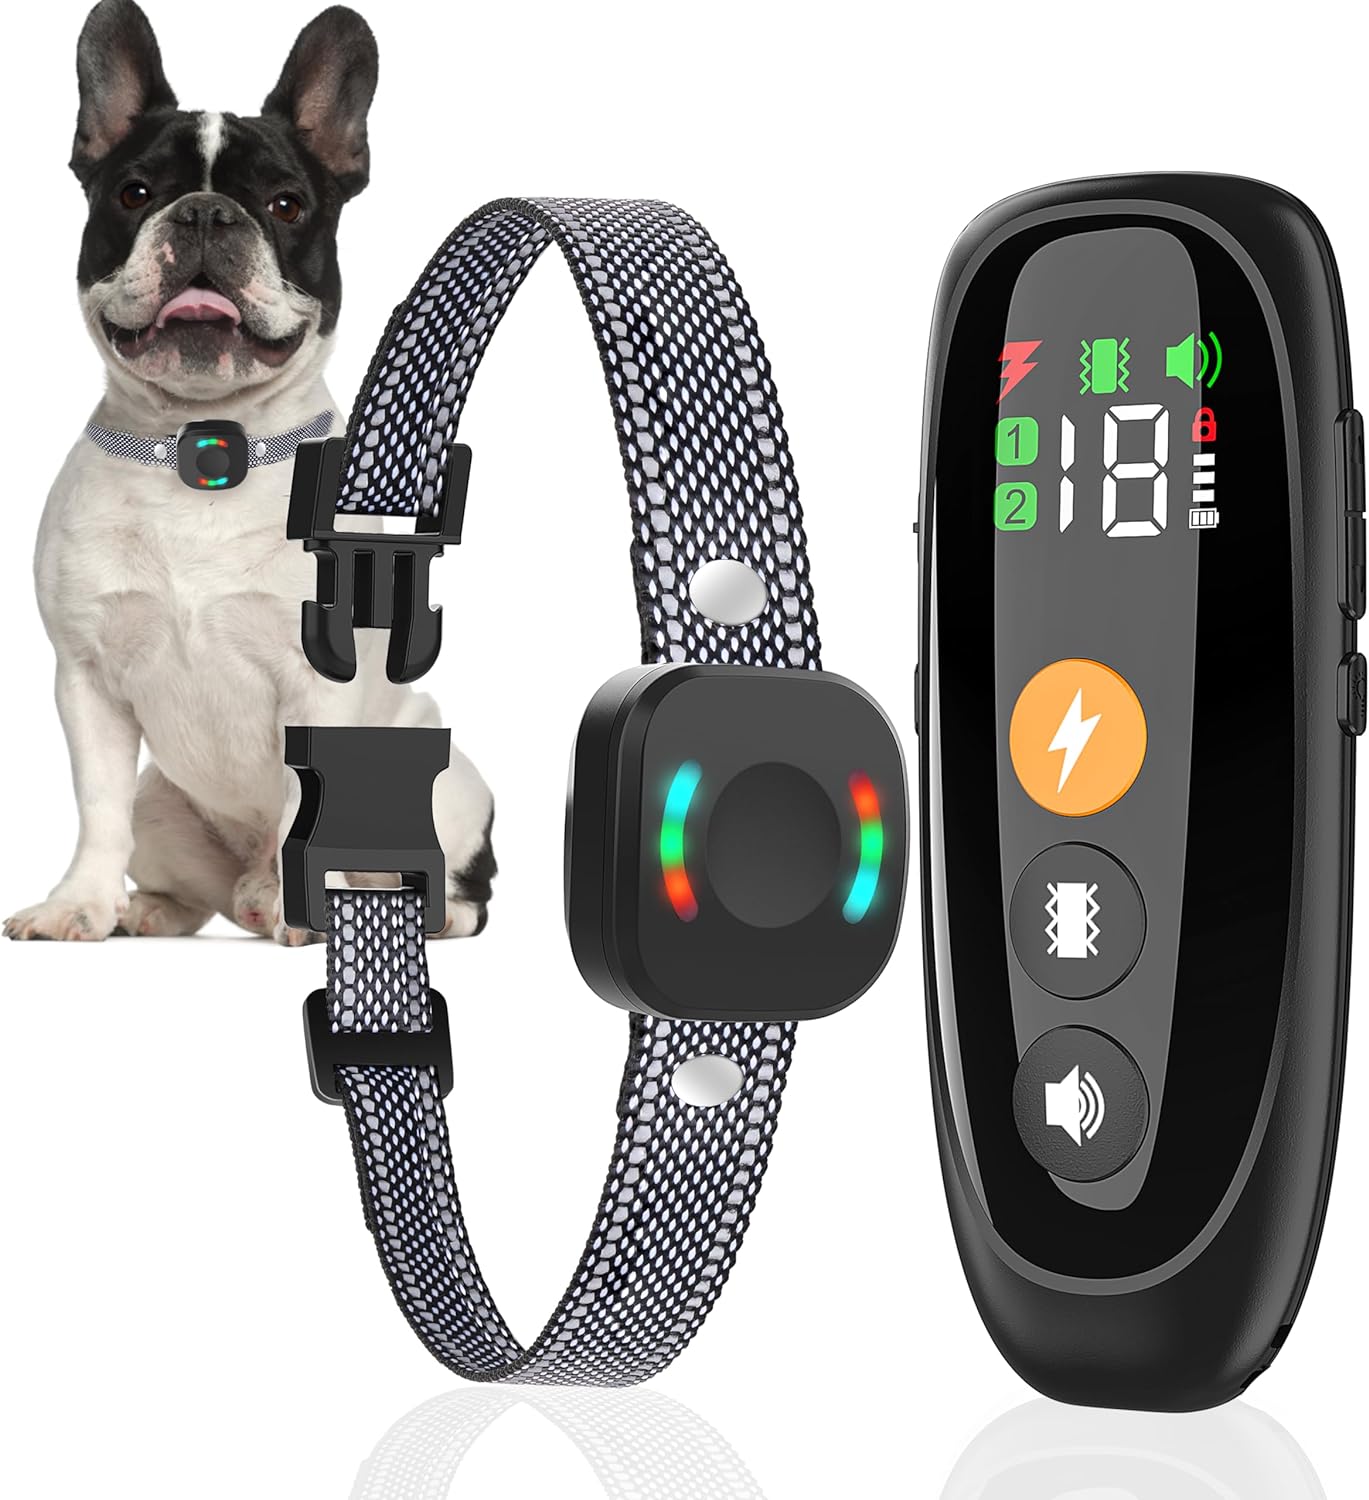 Dog Training Collar,2800FT for 8-120lbs,Dog Shock Collar with Remote, Electric Collar 4 Training Modes Beep,Vibration,Shock,Dog Finder,E-Collar Rechargeable Waterproof Large/Medium/Small (1PC, Black)